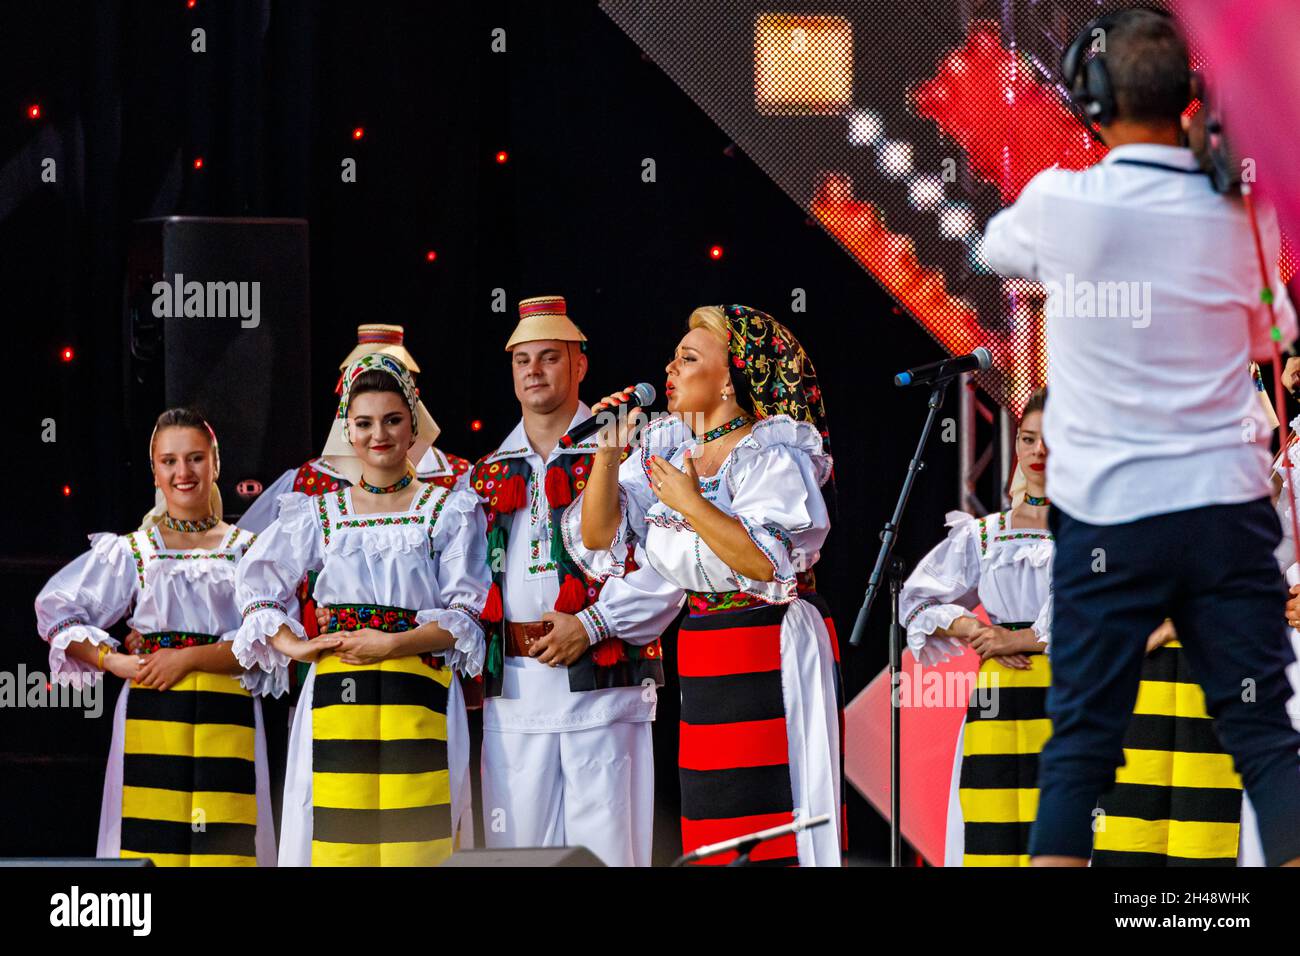 Romanian People in folkloric dress at the folkloric festival in Sibiu in Romania, August 07, 2021 Stock Photo